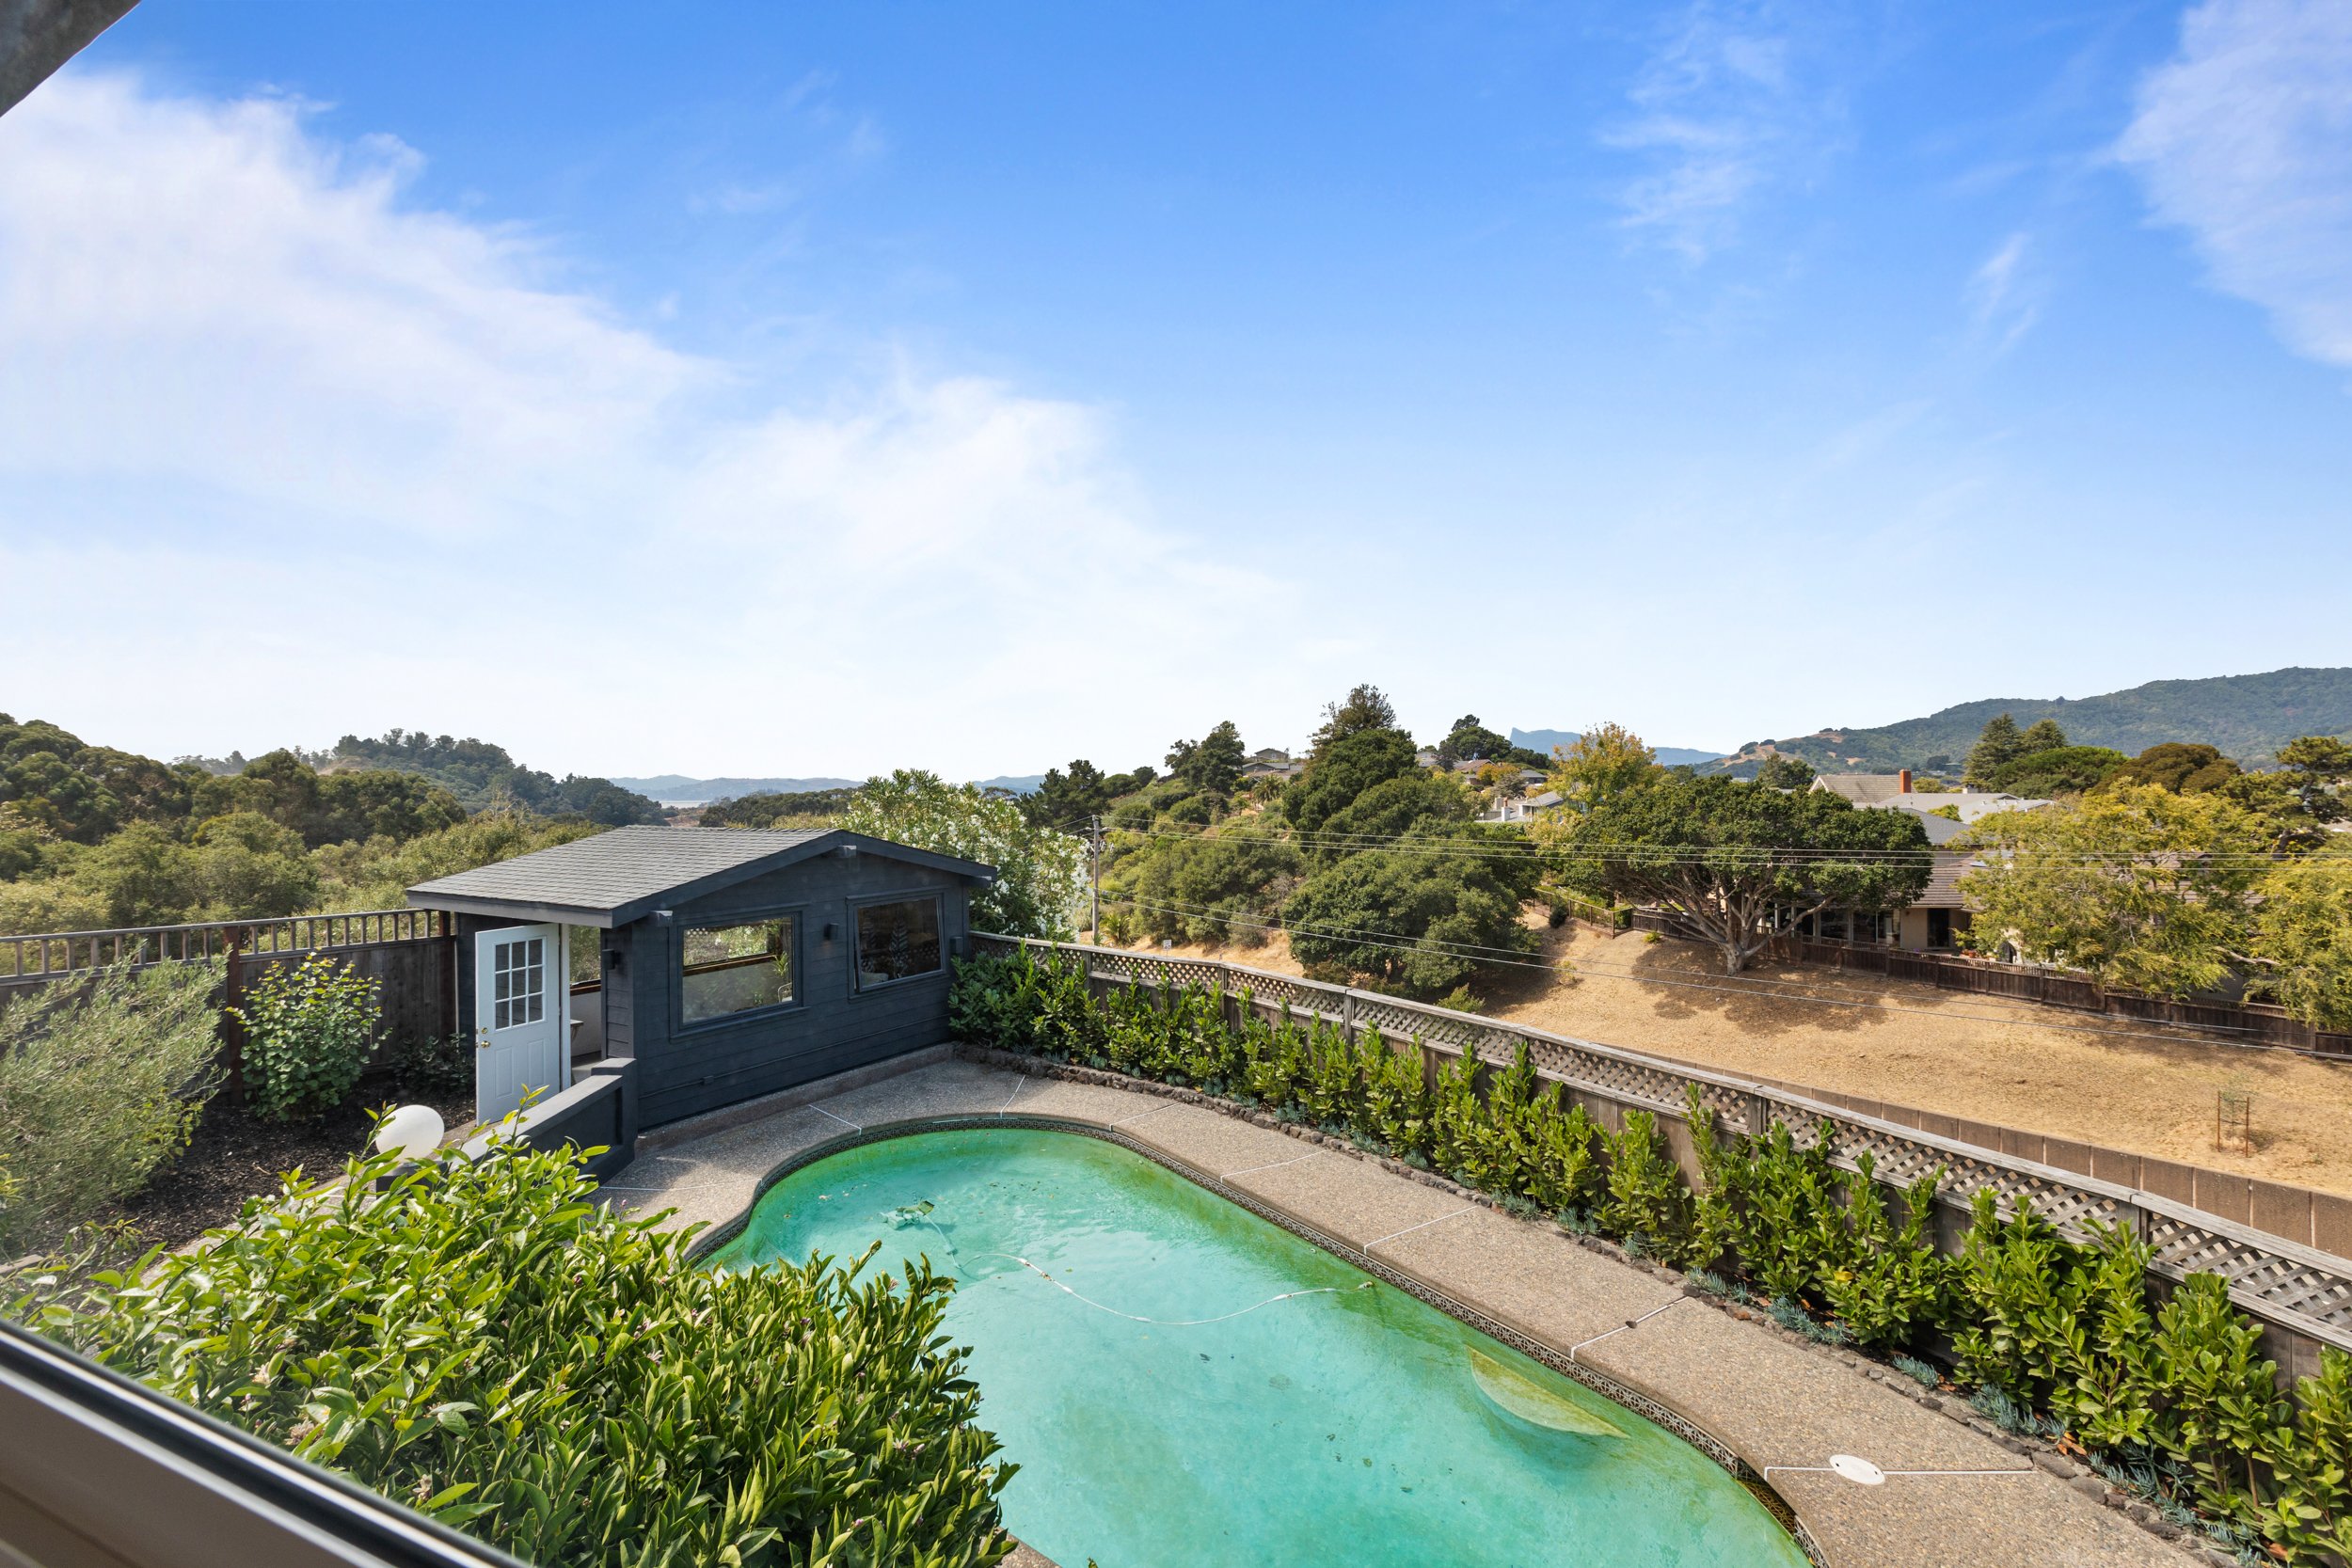 2 San Marino Court, San Rafael Real Estate For Sale _ Listed by Own Marin Best Realtors Allie Fornesi and Barr Haney-35.jpg